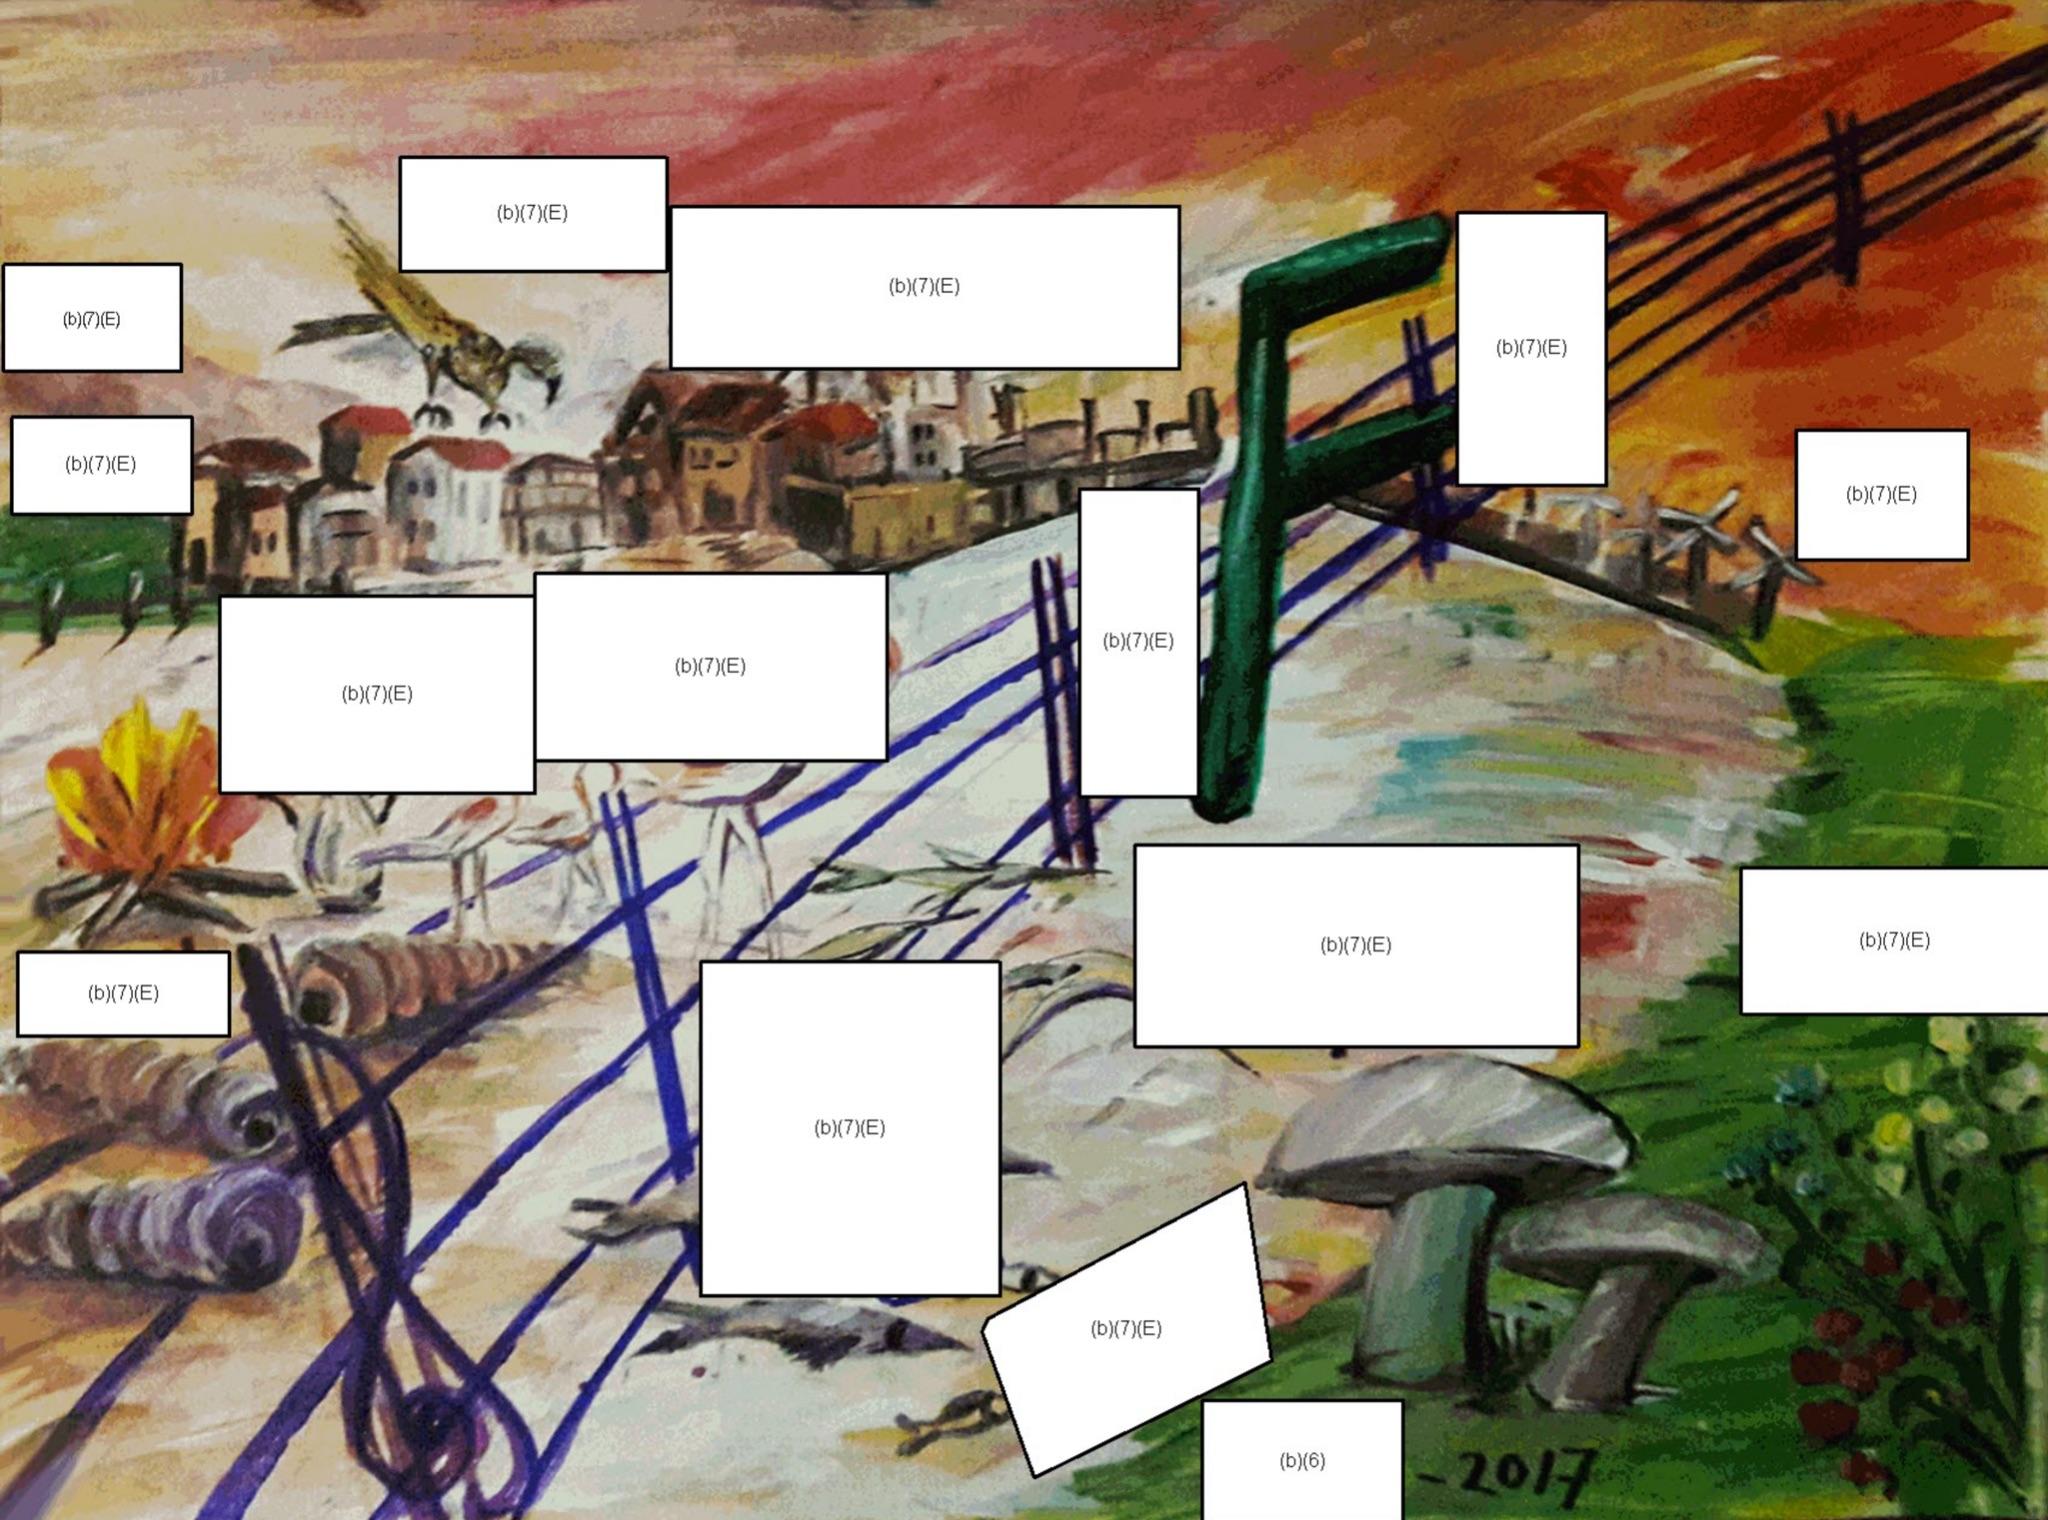 A drawn painting that features large mushrooms and a field separated from a village via a barbed fence. All cross the image are scattered 15 redactions, all labeled b7E.